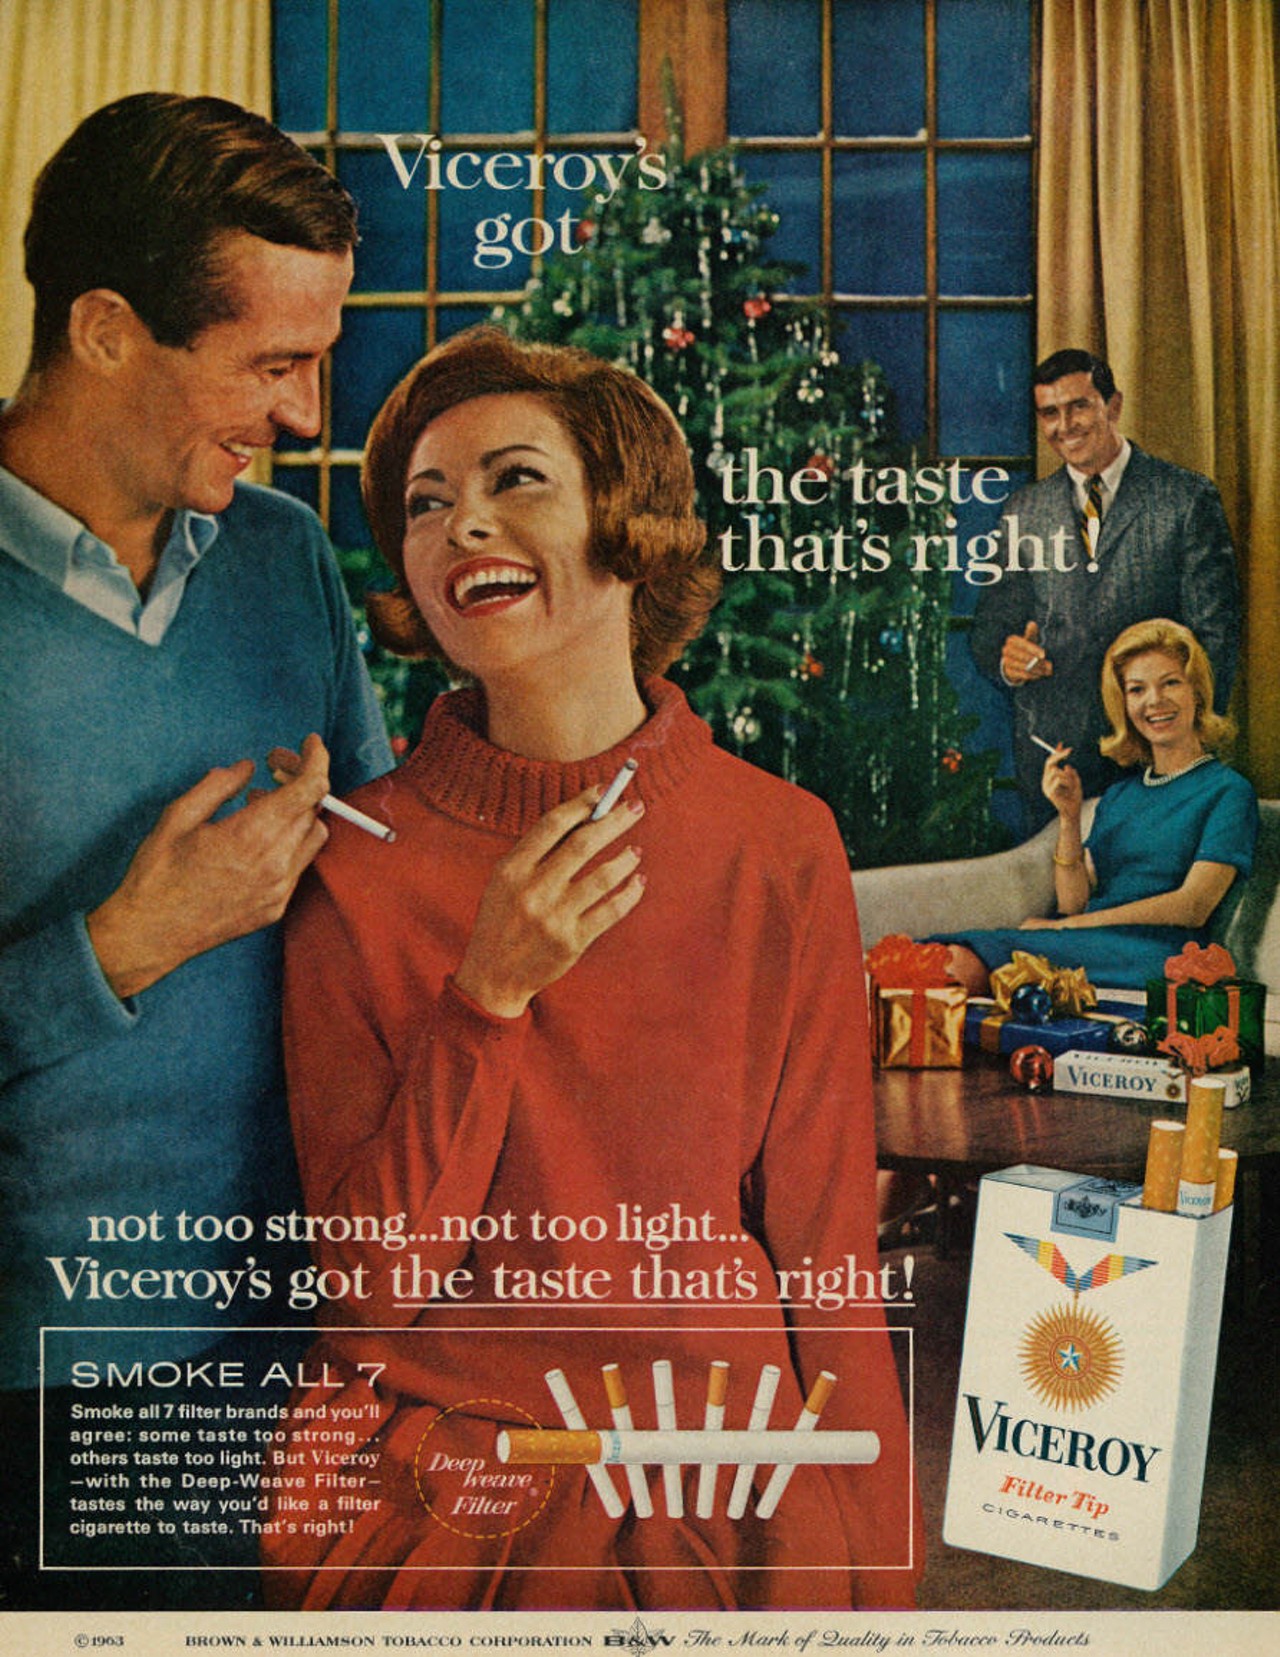 Viceroy Filter Tip Cigarettes holiday ad, 1963